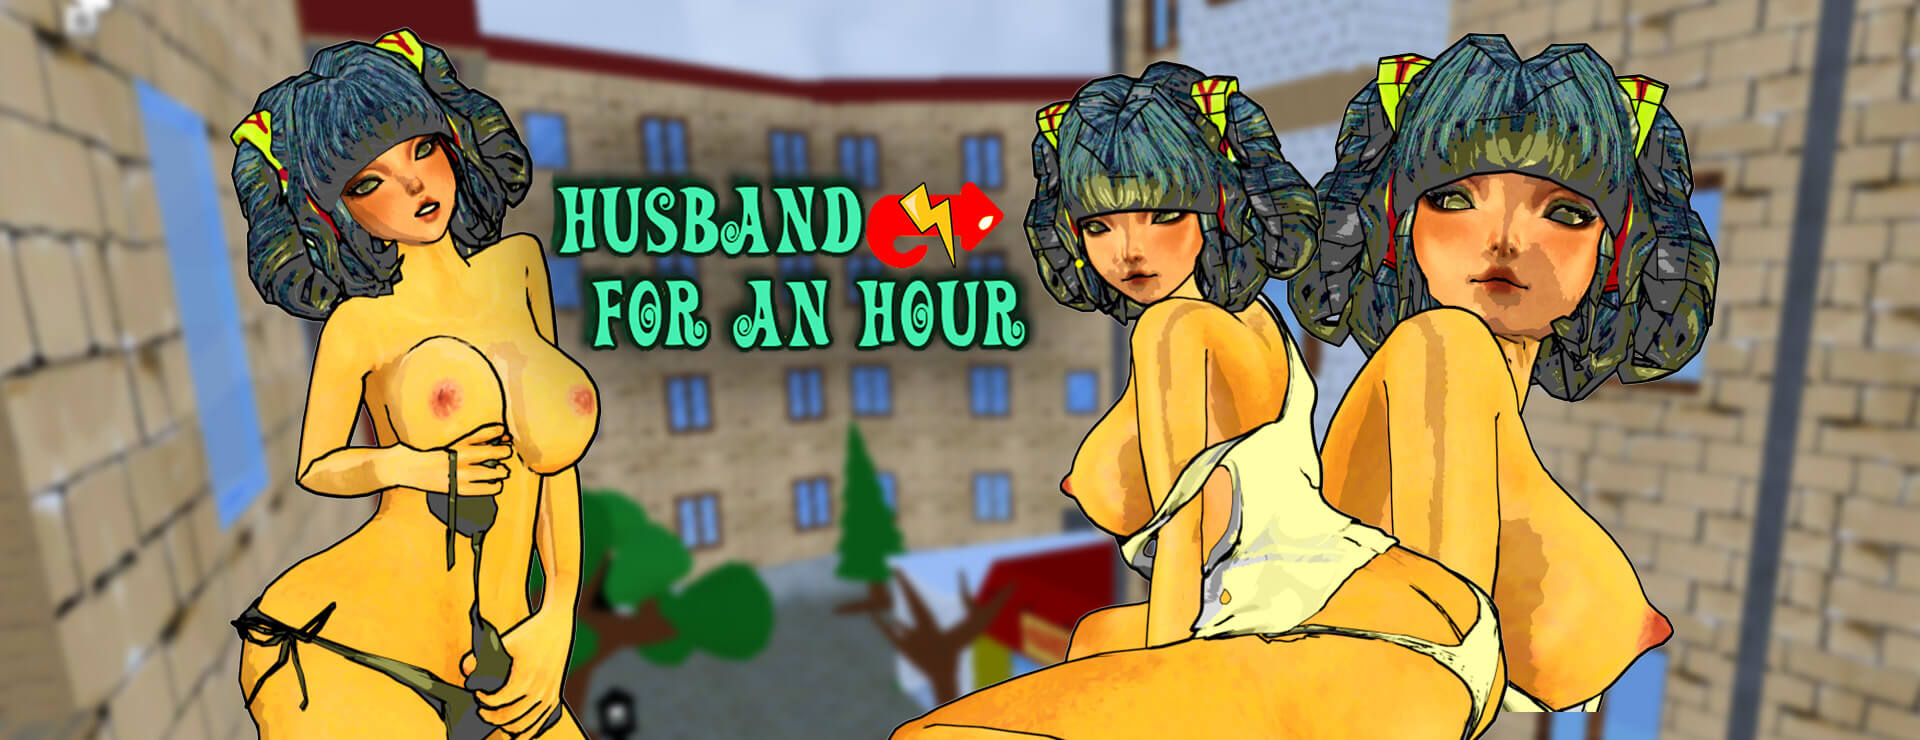 Husband for an Hour - 动作冒险游戏 遊戲